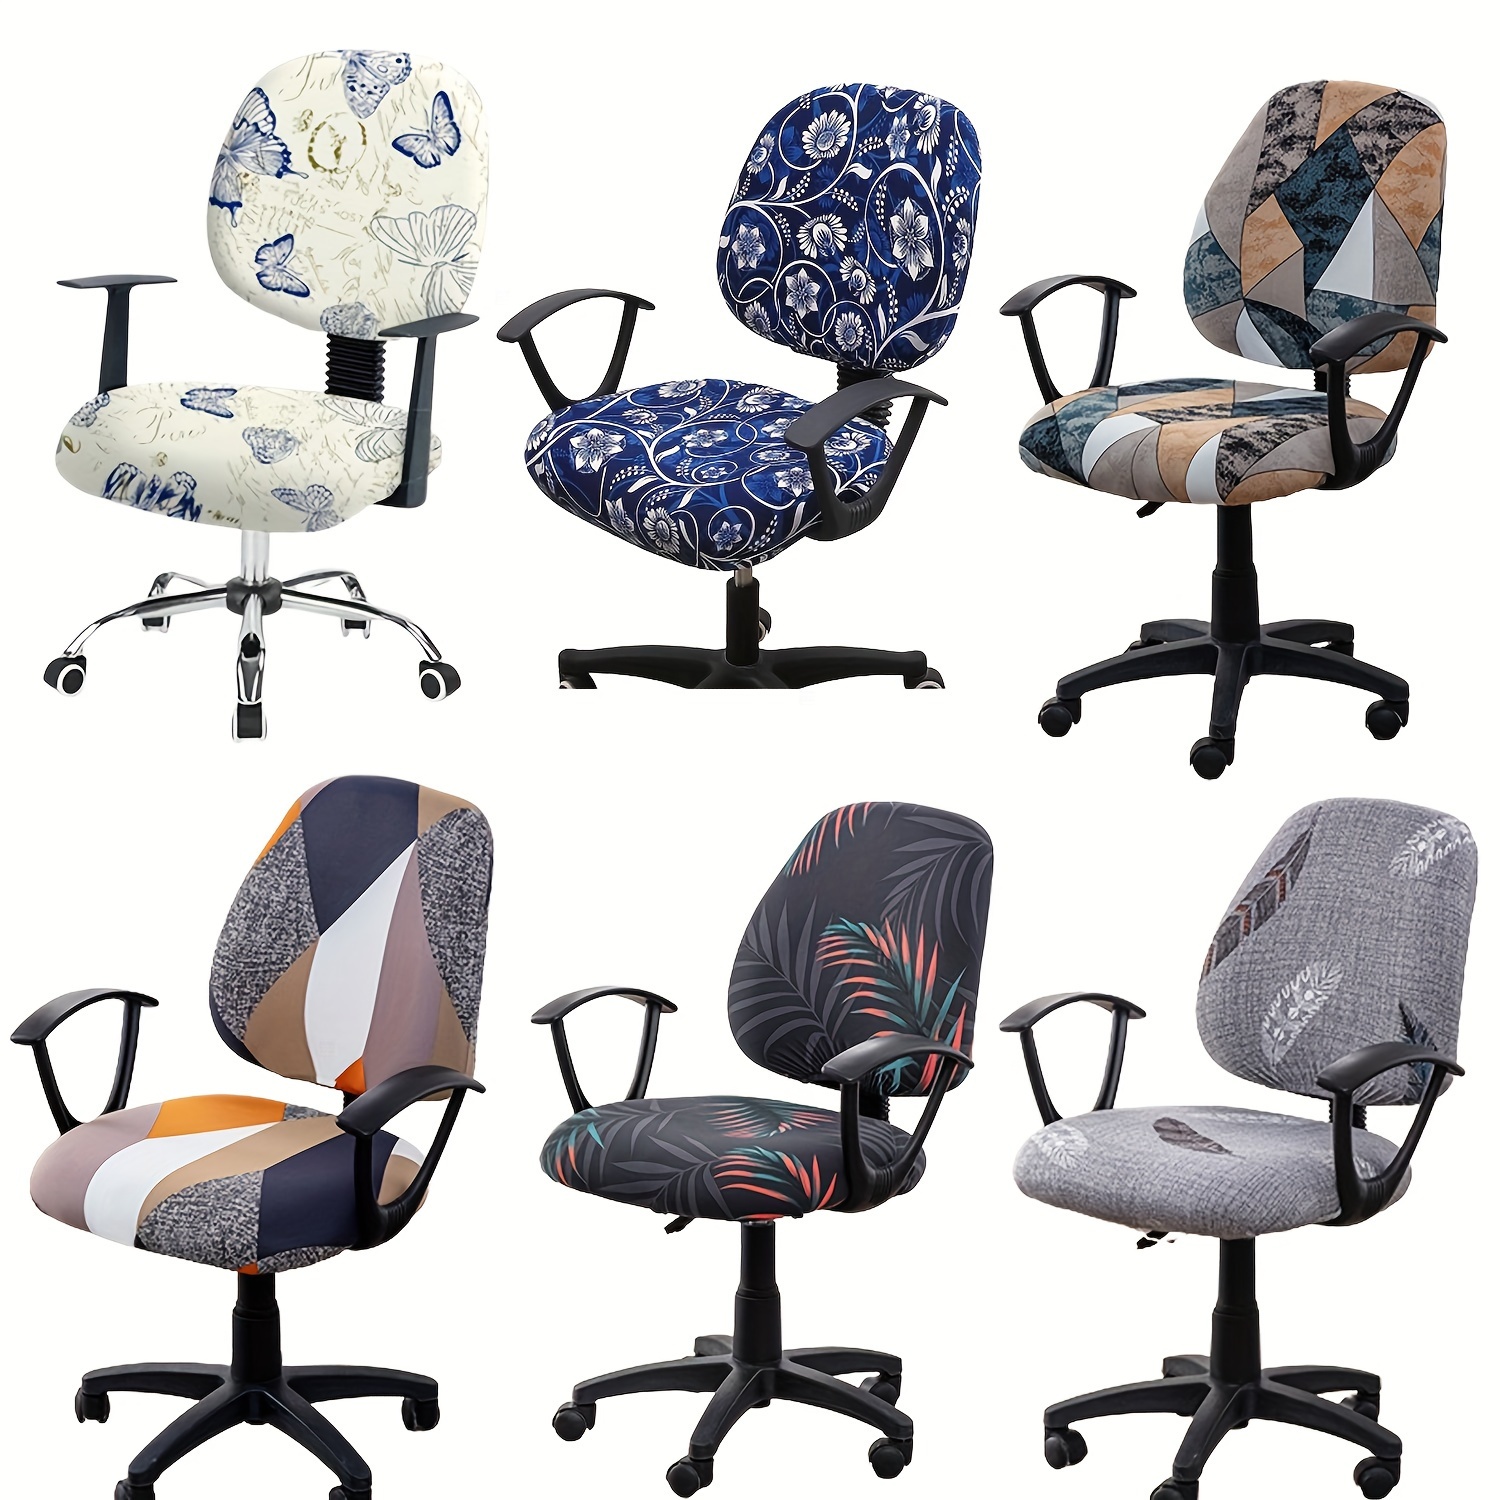 

2pcs Set Stretch Printed Office Computer Chair Covers, Soft Spandex Universal Rotating Desk Chair Slipcover, Removable Washable Chair Protector (seat Cover + Backrest Cover)